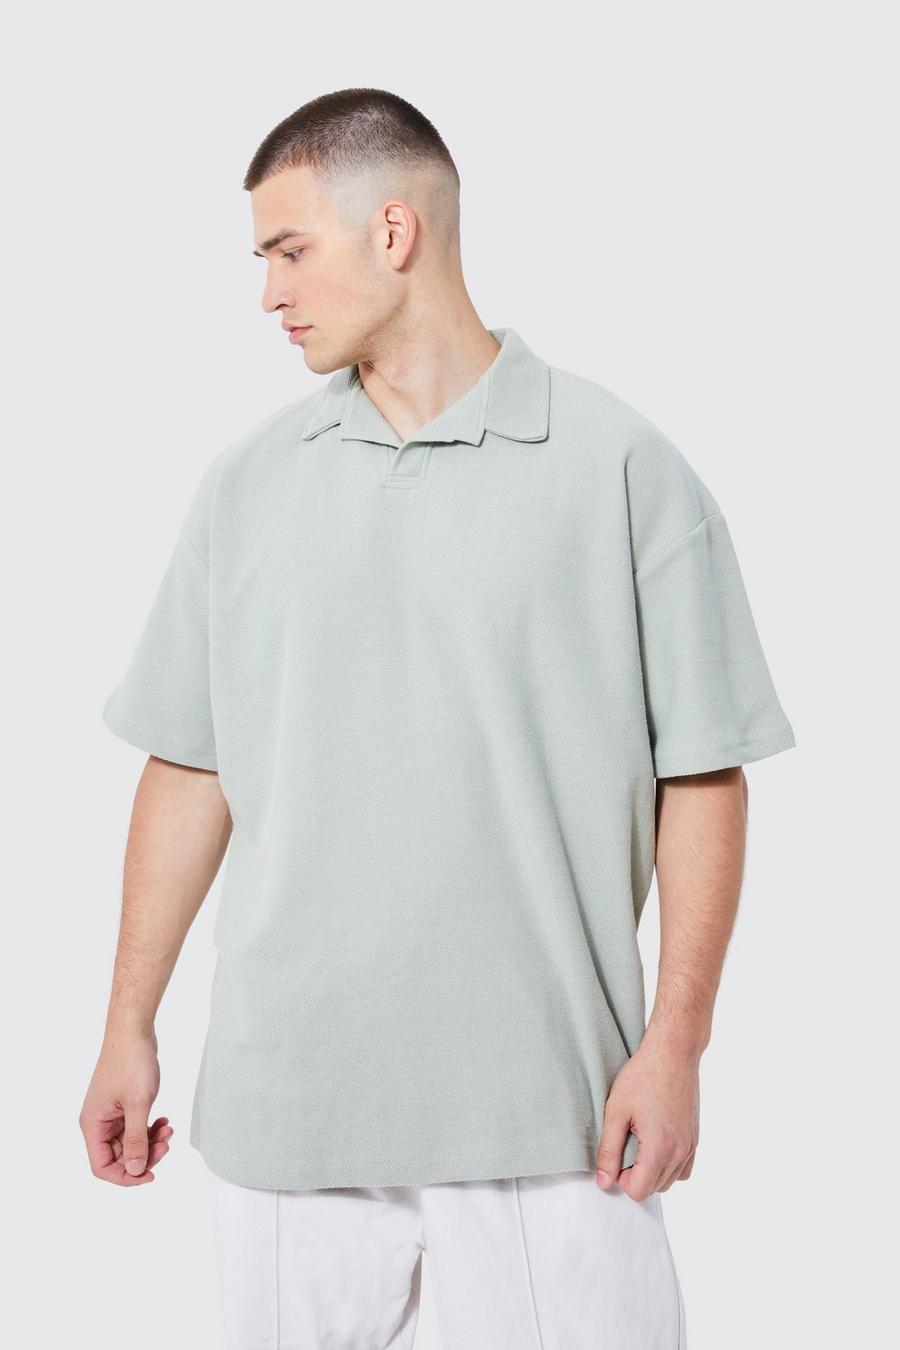 Sage Tall Oversized Revere Twill Jersey Polo